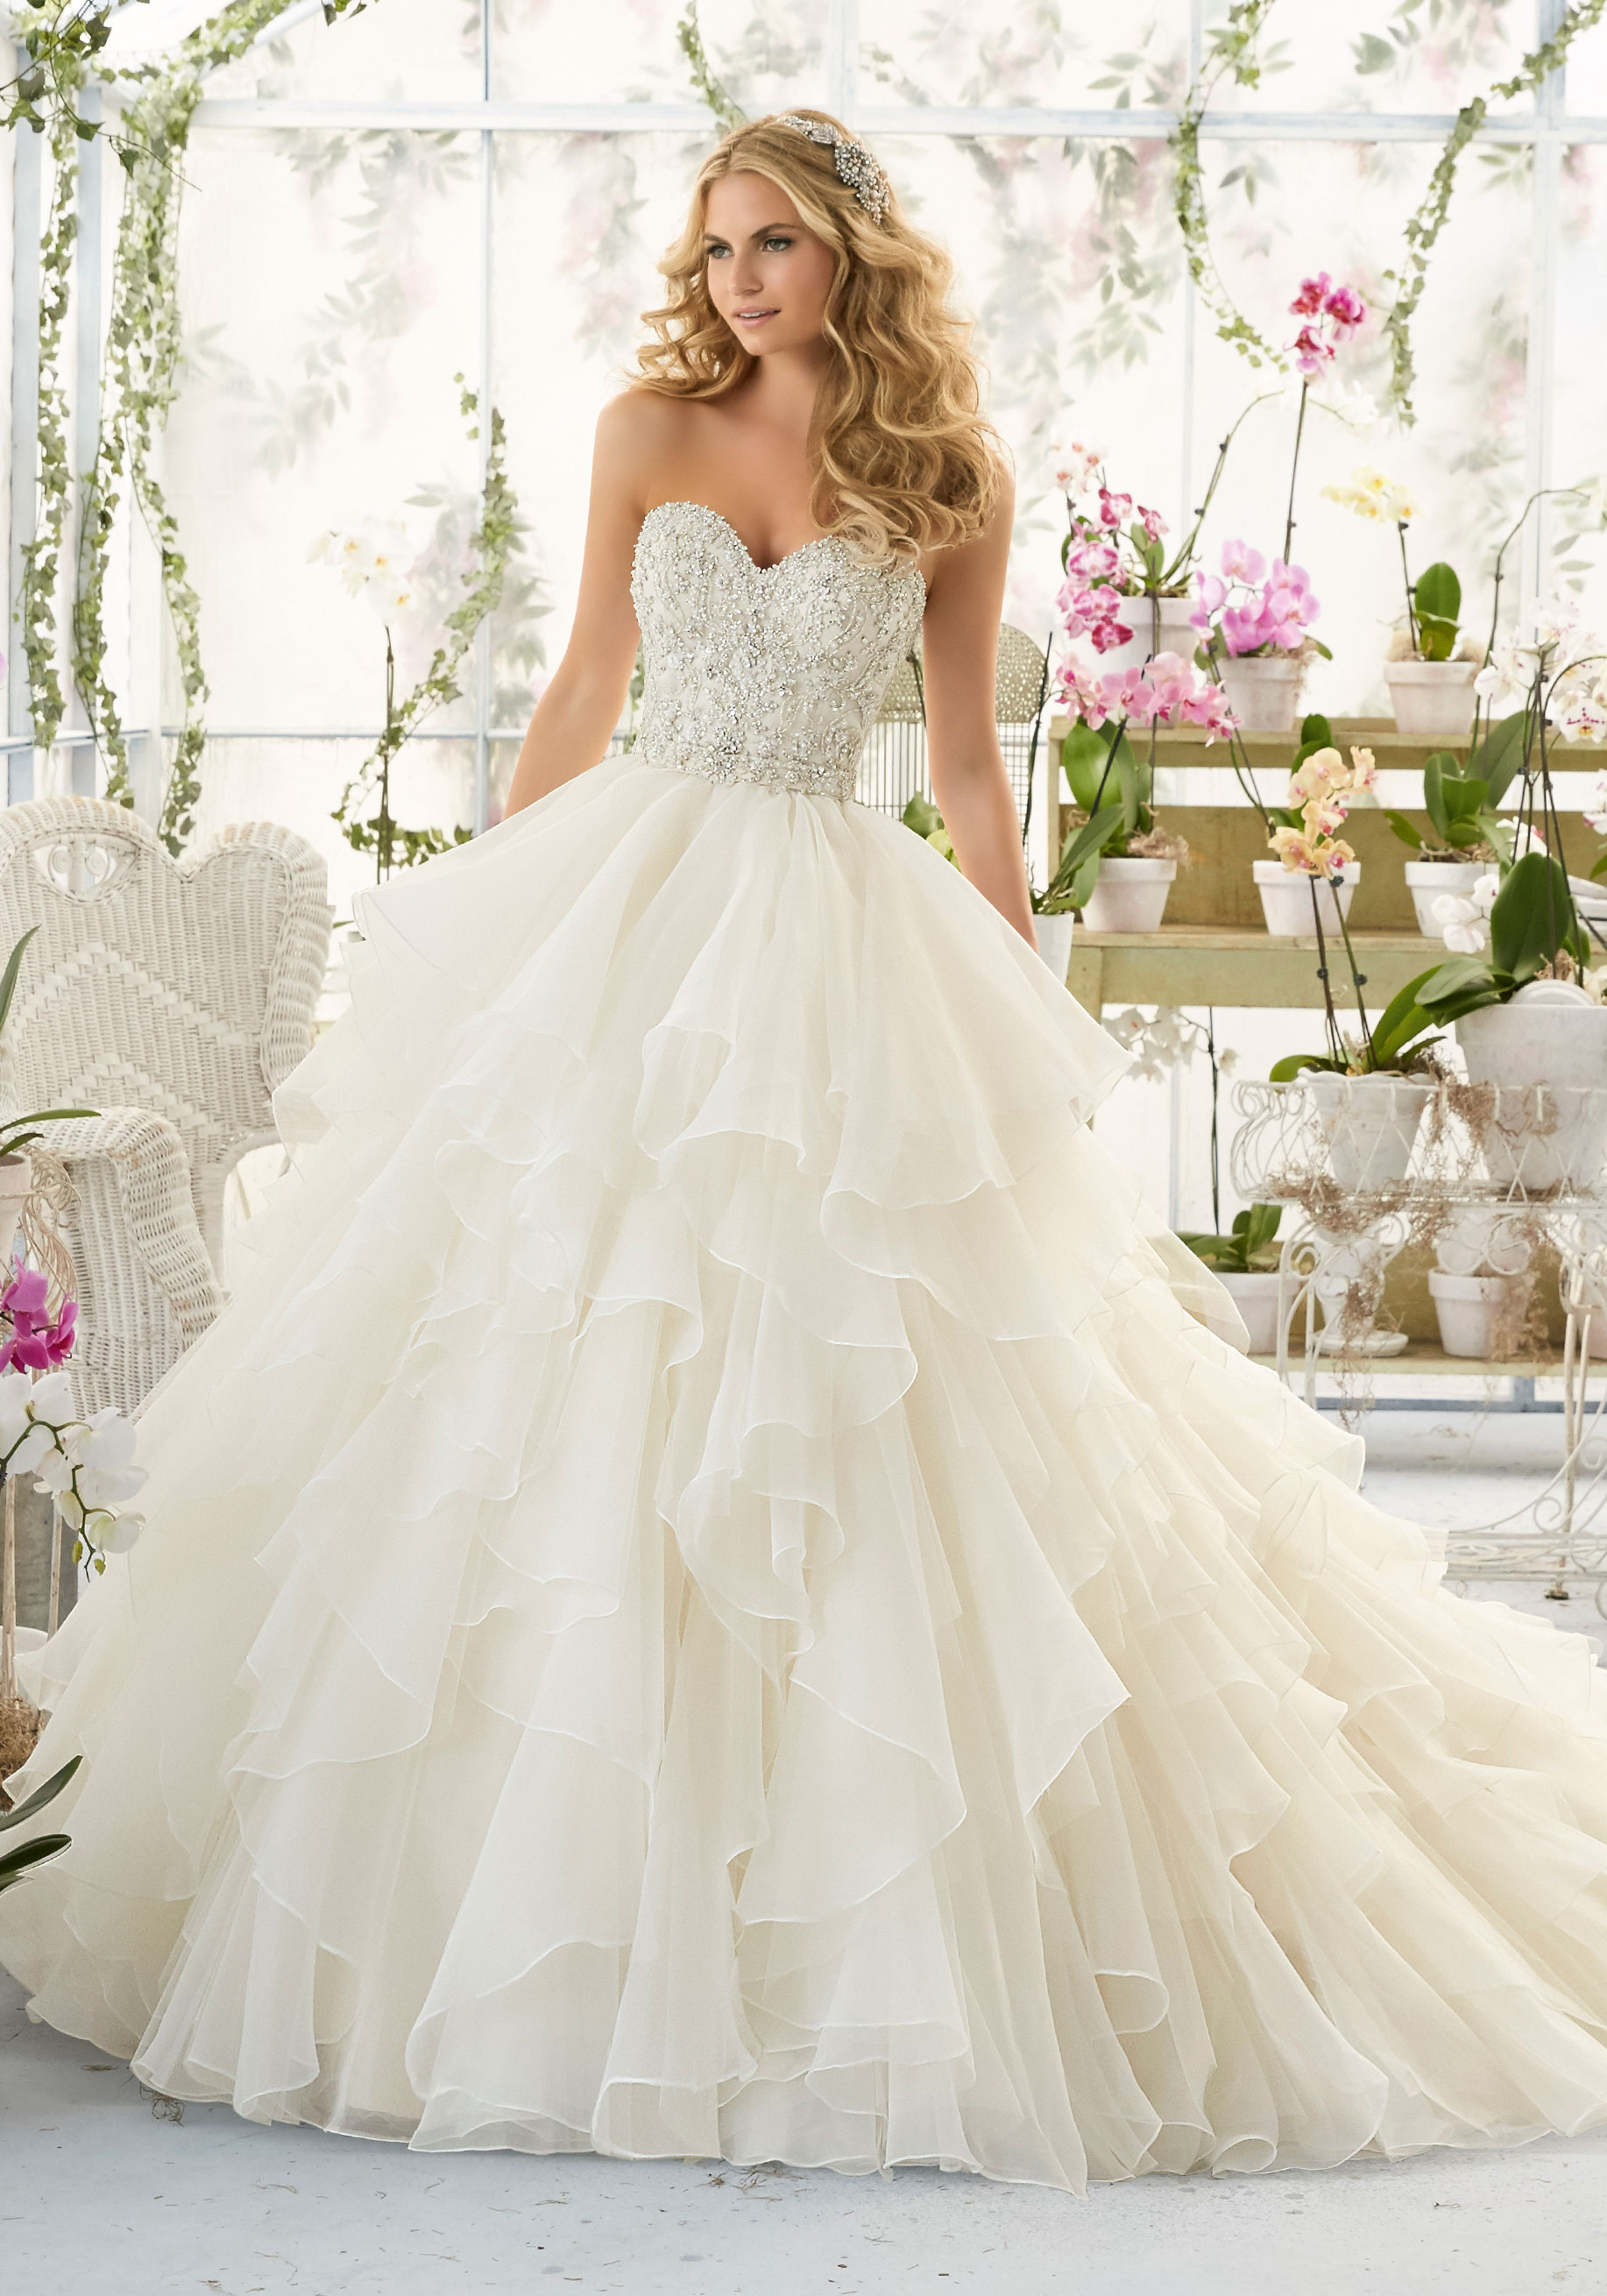 Best Store Return Policy for Wedding Dresses - Store Return Policy